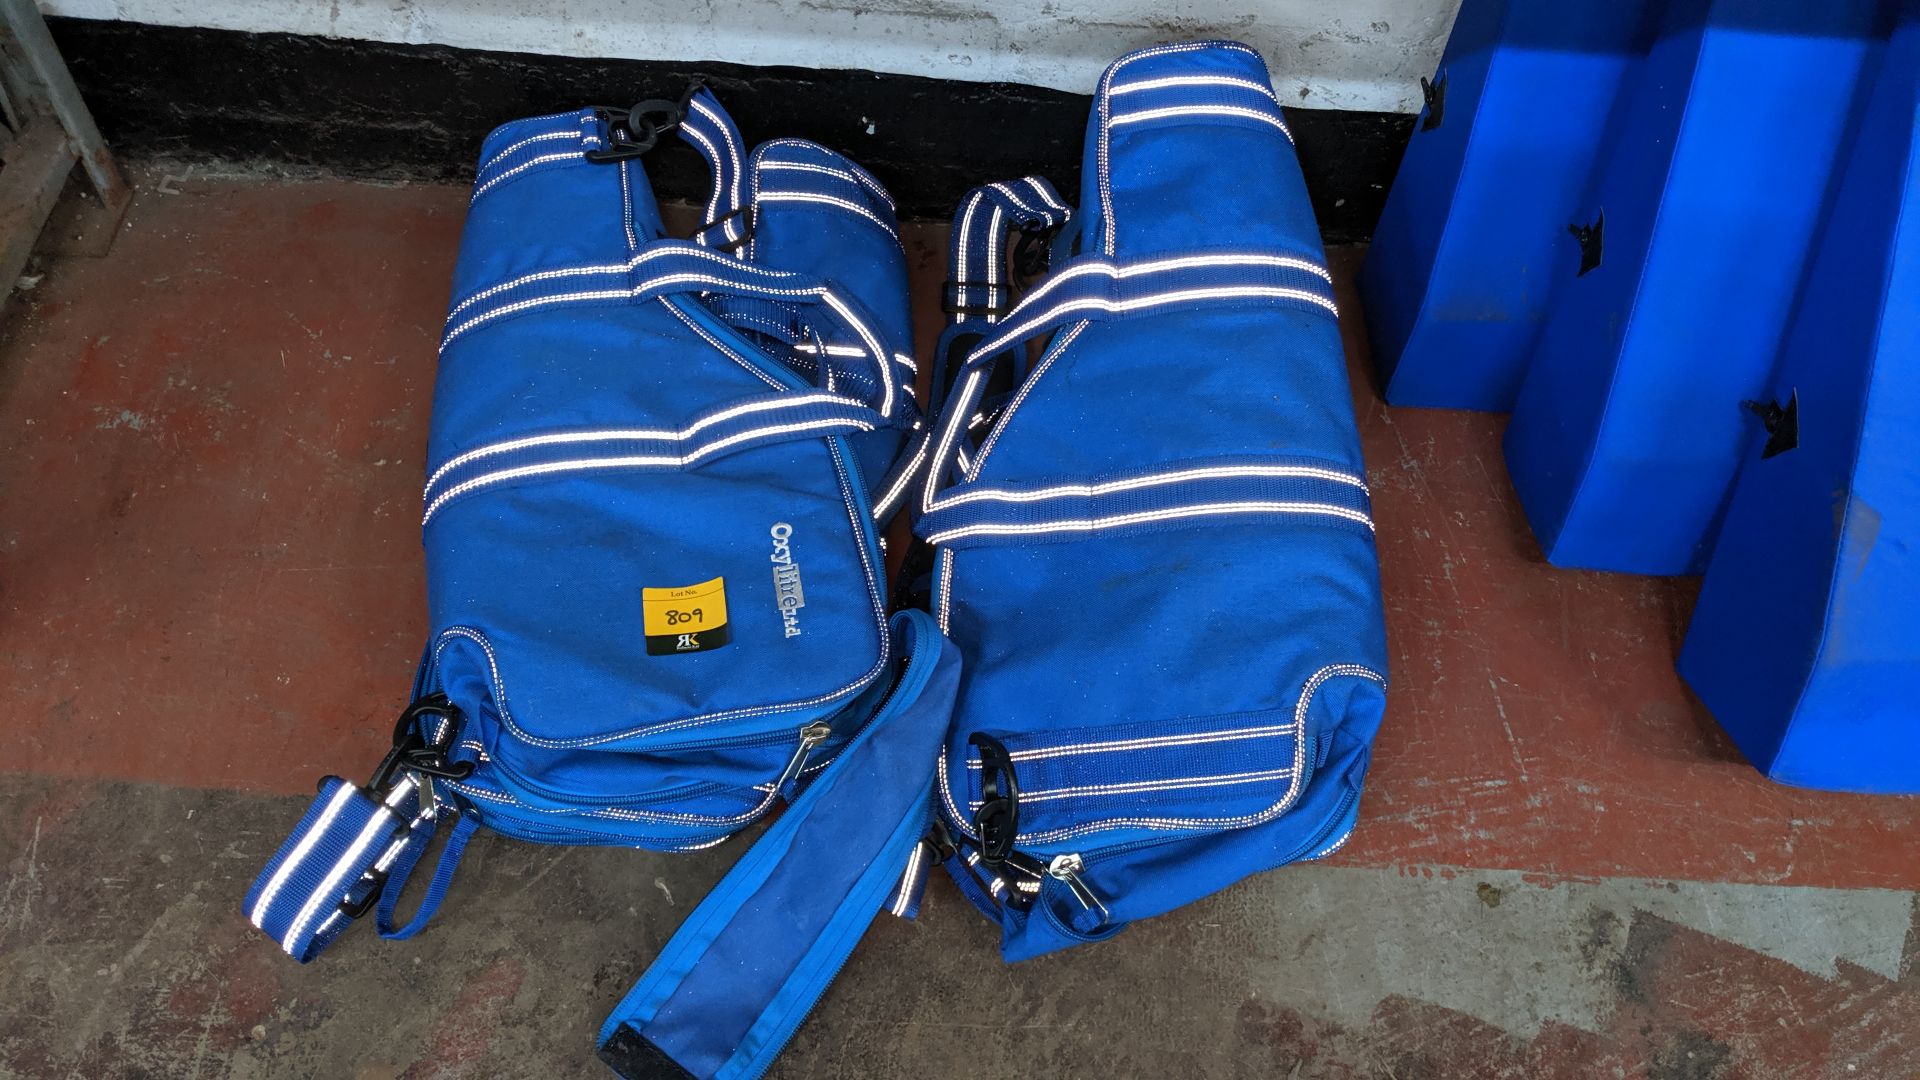 4 off Oxylitre Ltd carry bags. This is one of a large number of lots used/owned by One To One (North - Image 2 of 5